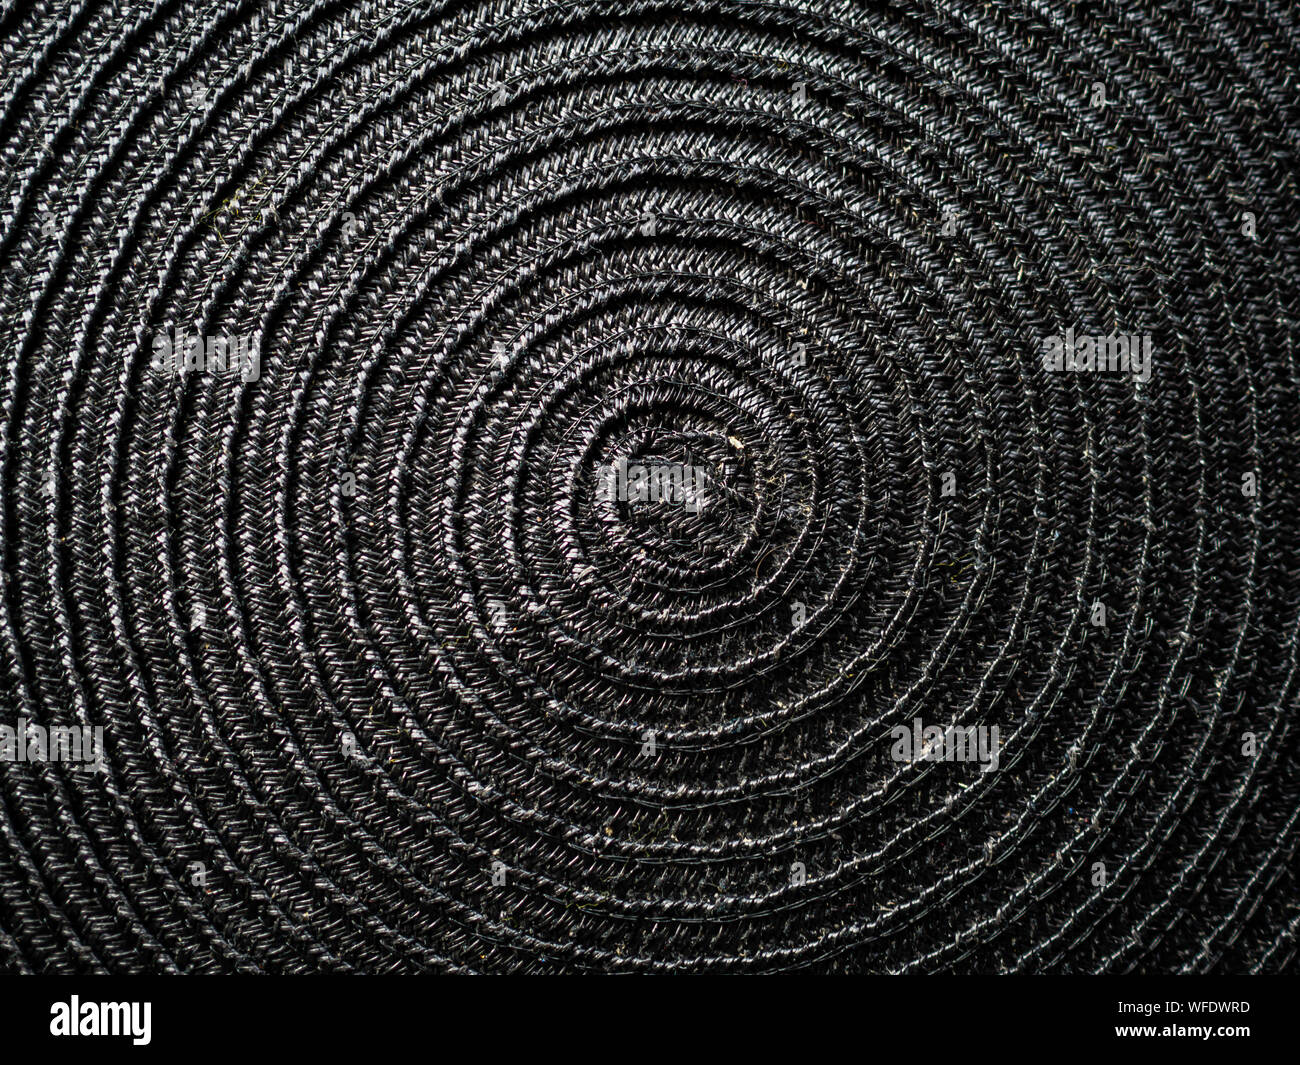 Black abstract woven surface with spiral circles Stock Photo